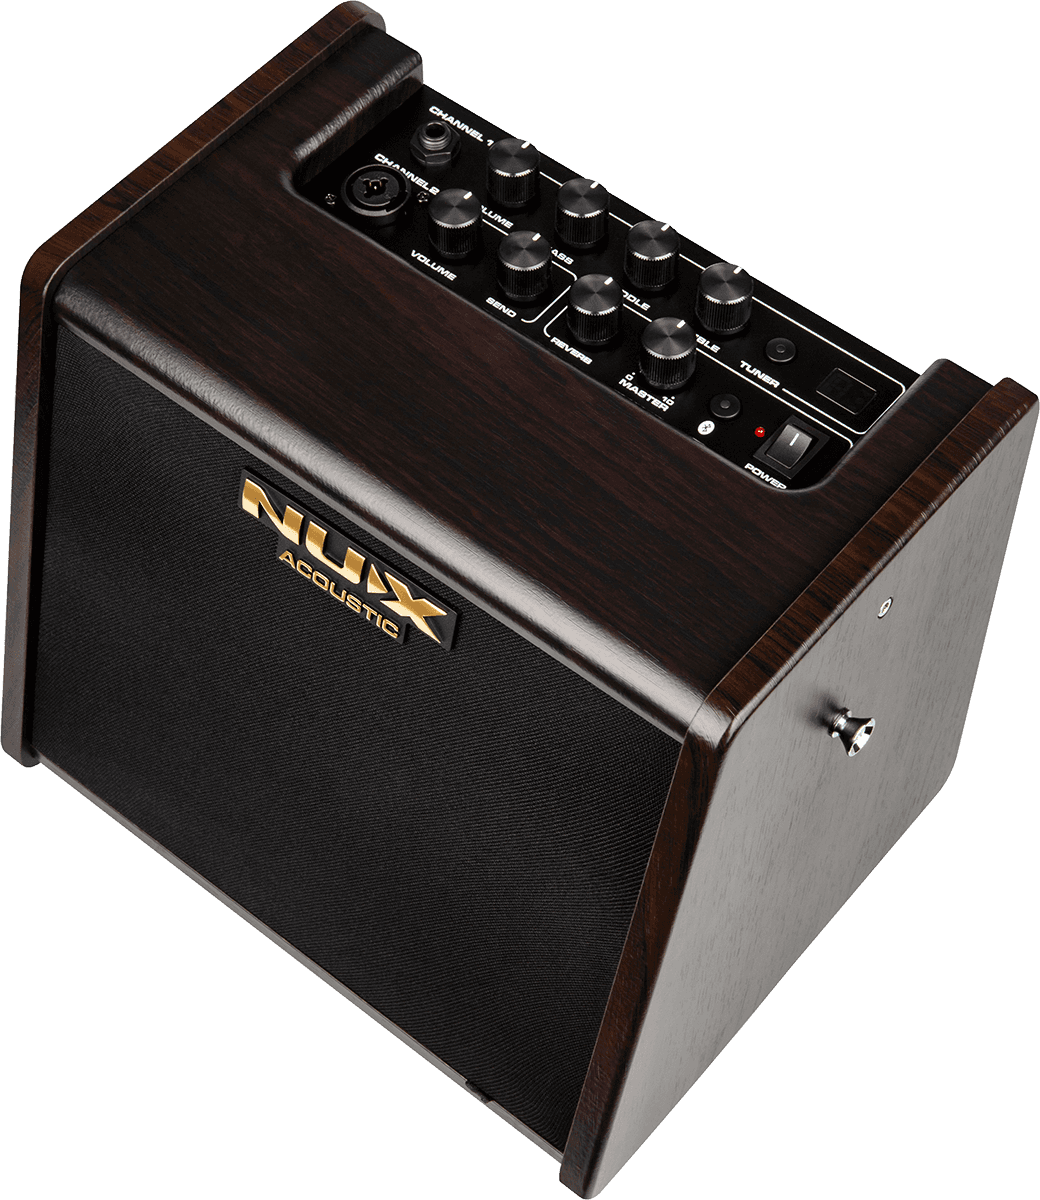 Portable battery-operated acoustic amp